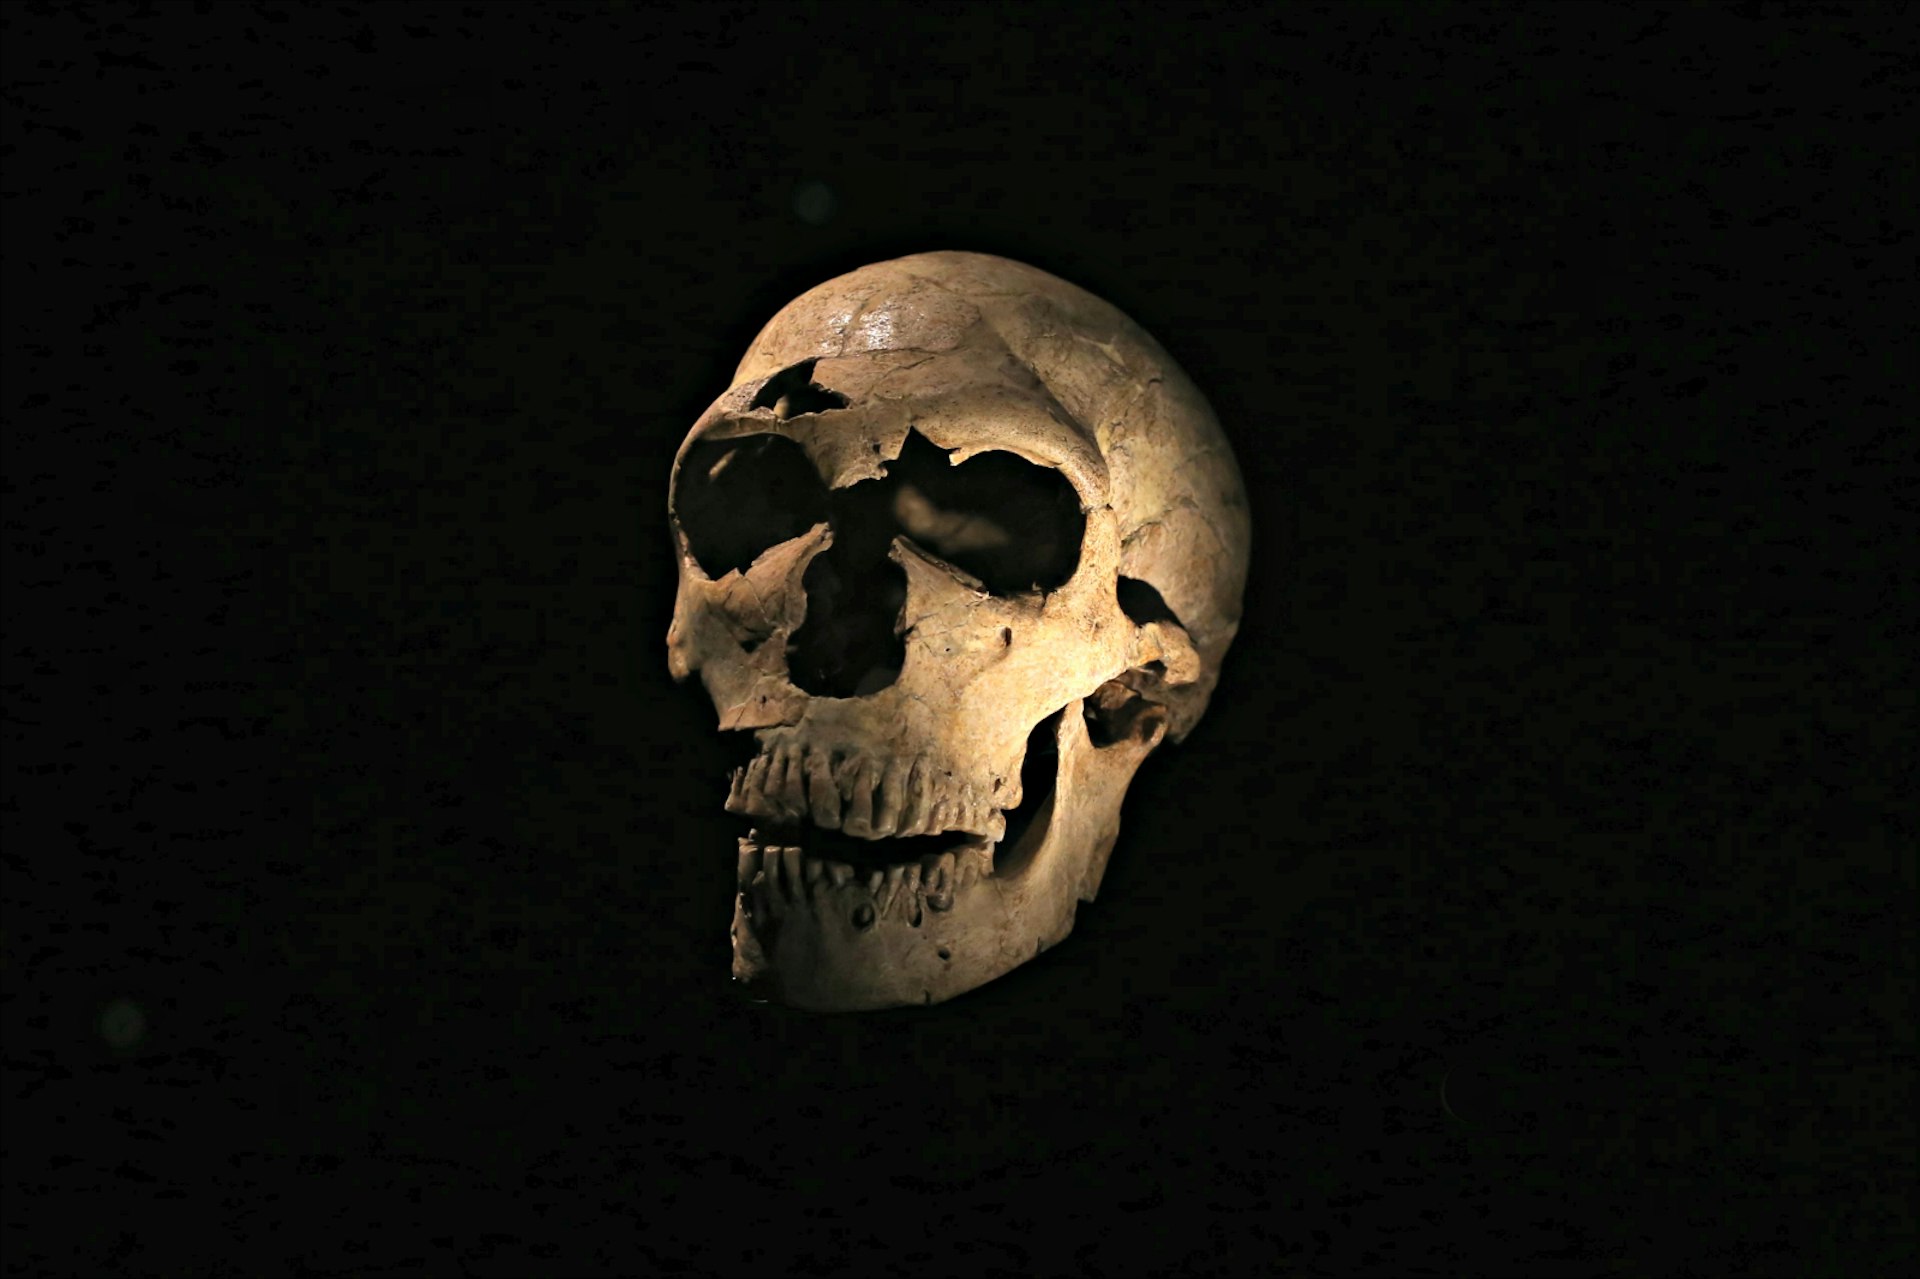 A skull at the Museum of Mankind in Paris